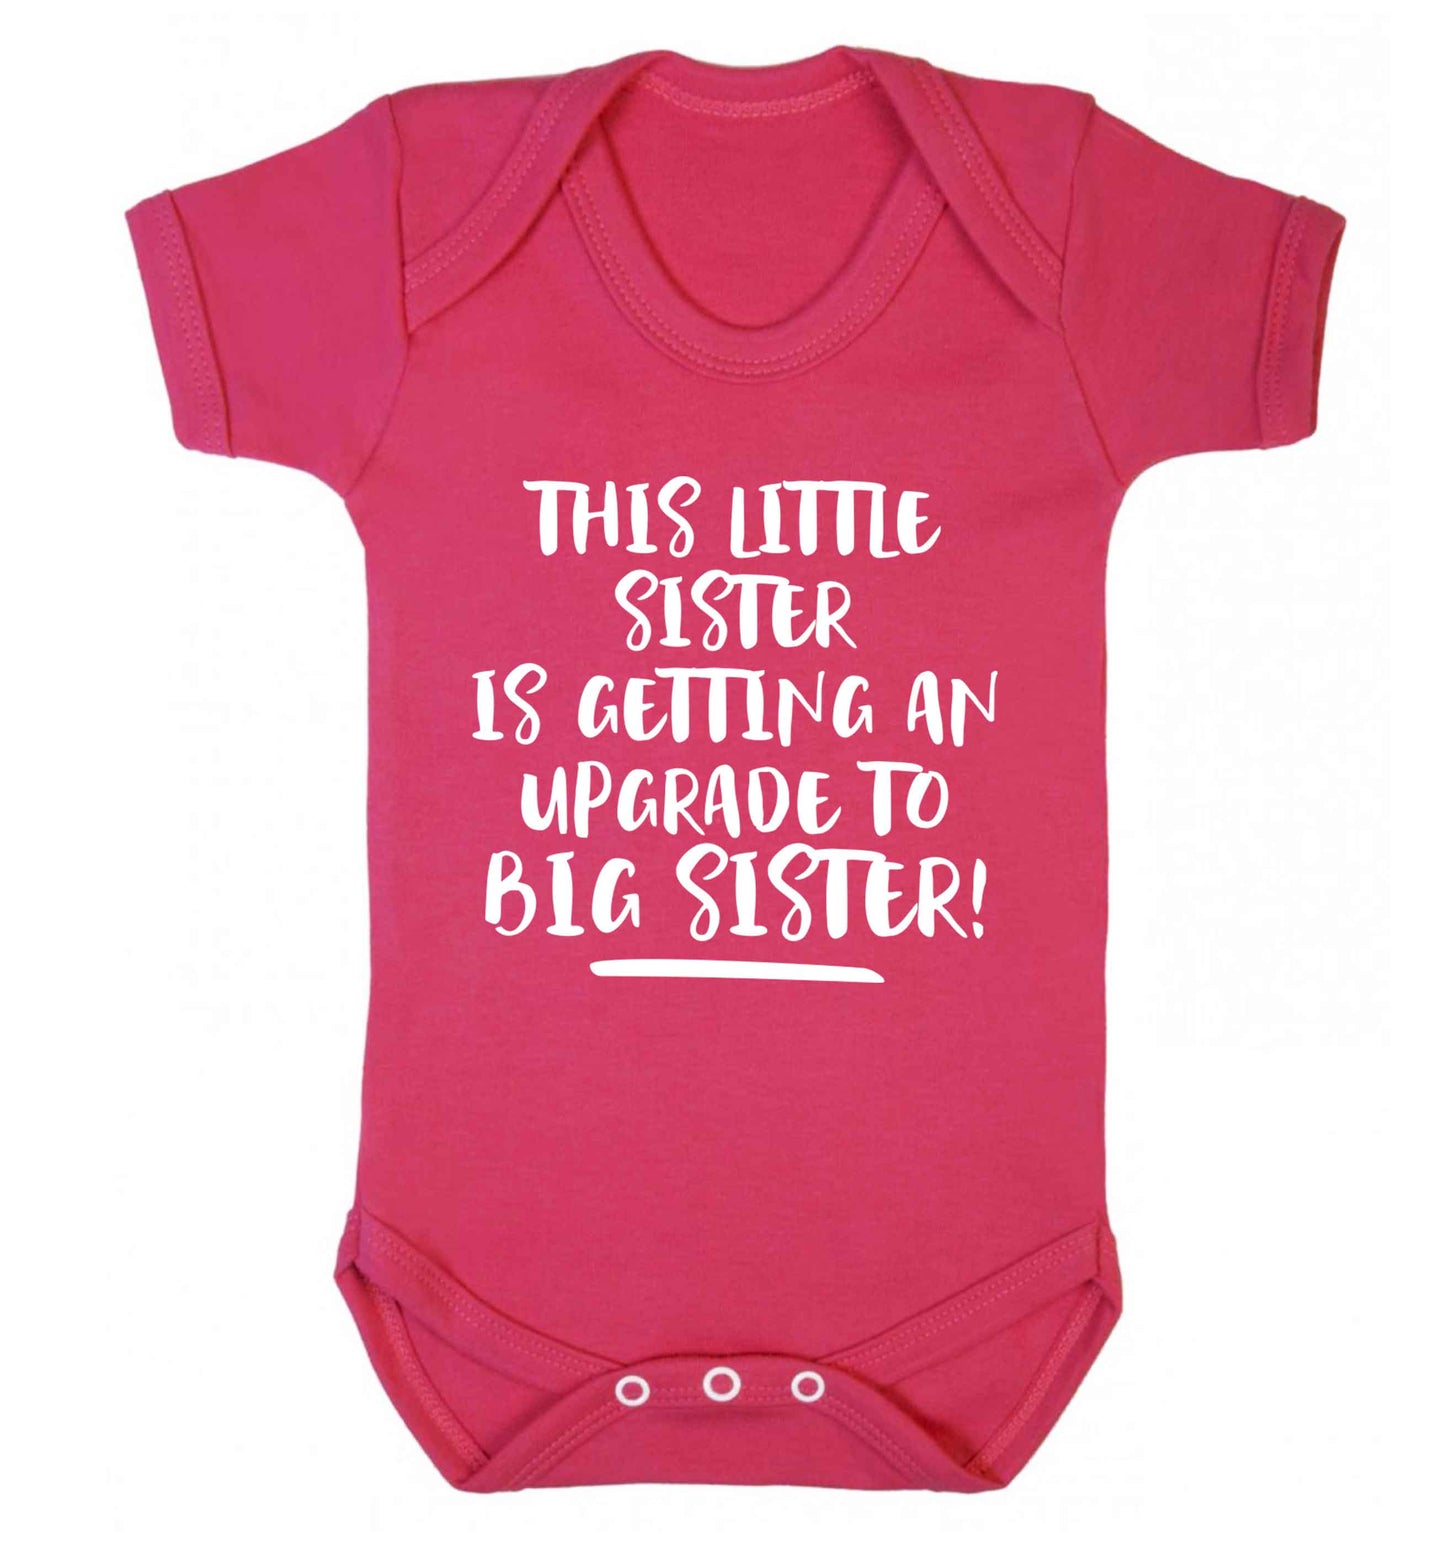 This little sister is getting an upgrade to big sister! Baby Vest dark pink 18-24 months